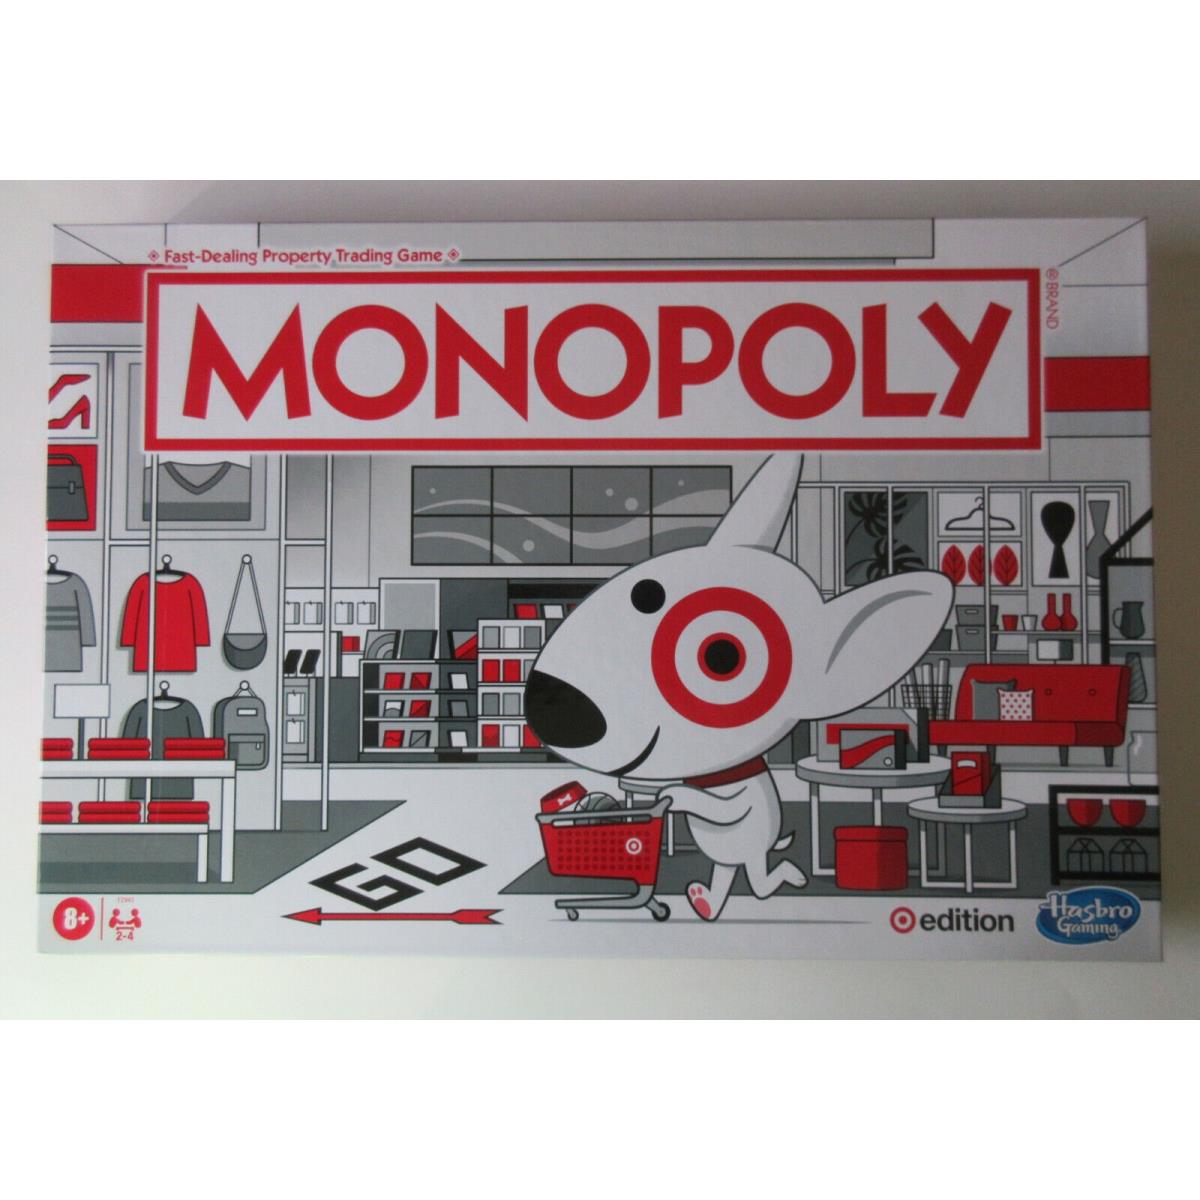 2021 Monopoly Game Target Edition Exclusive Limited Rare